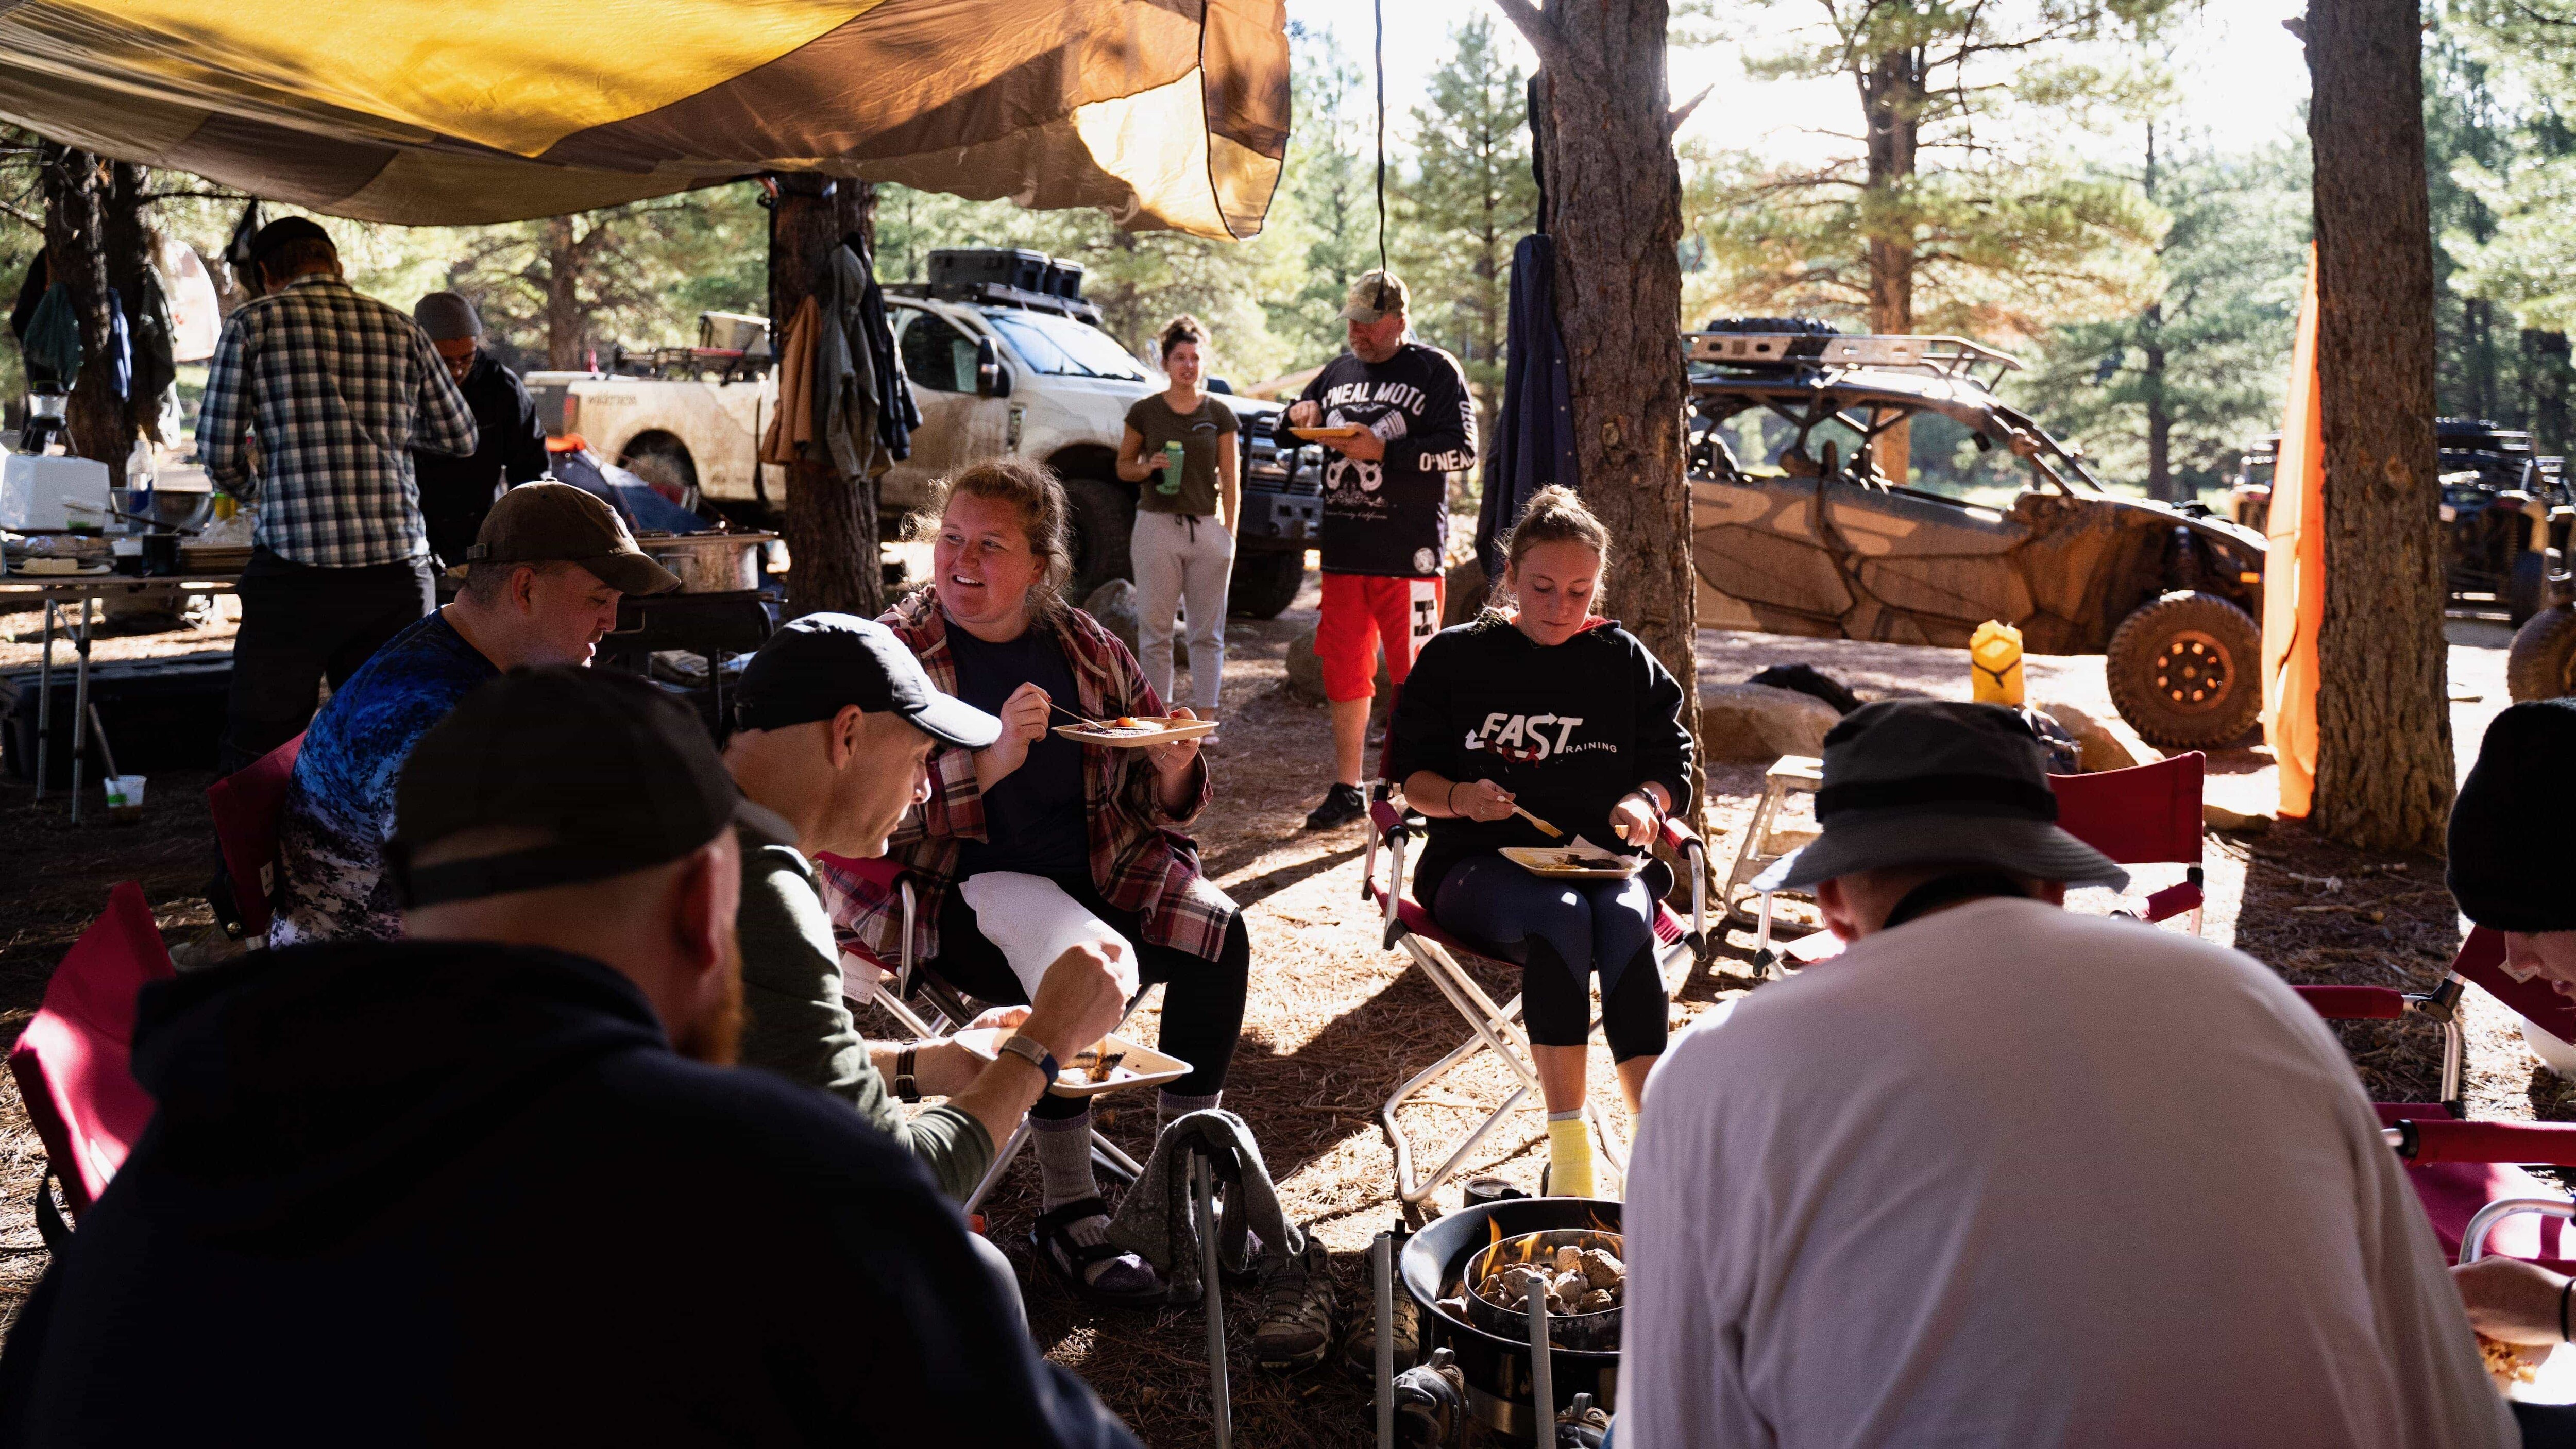 A group of people eating sitting on a camp site